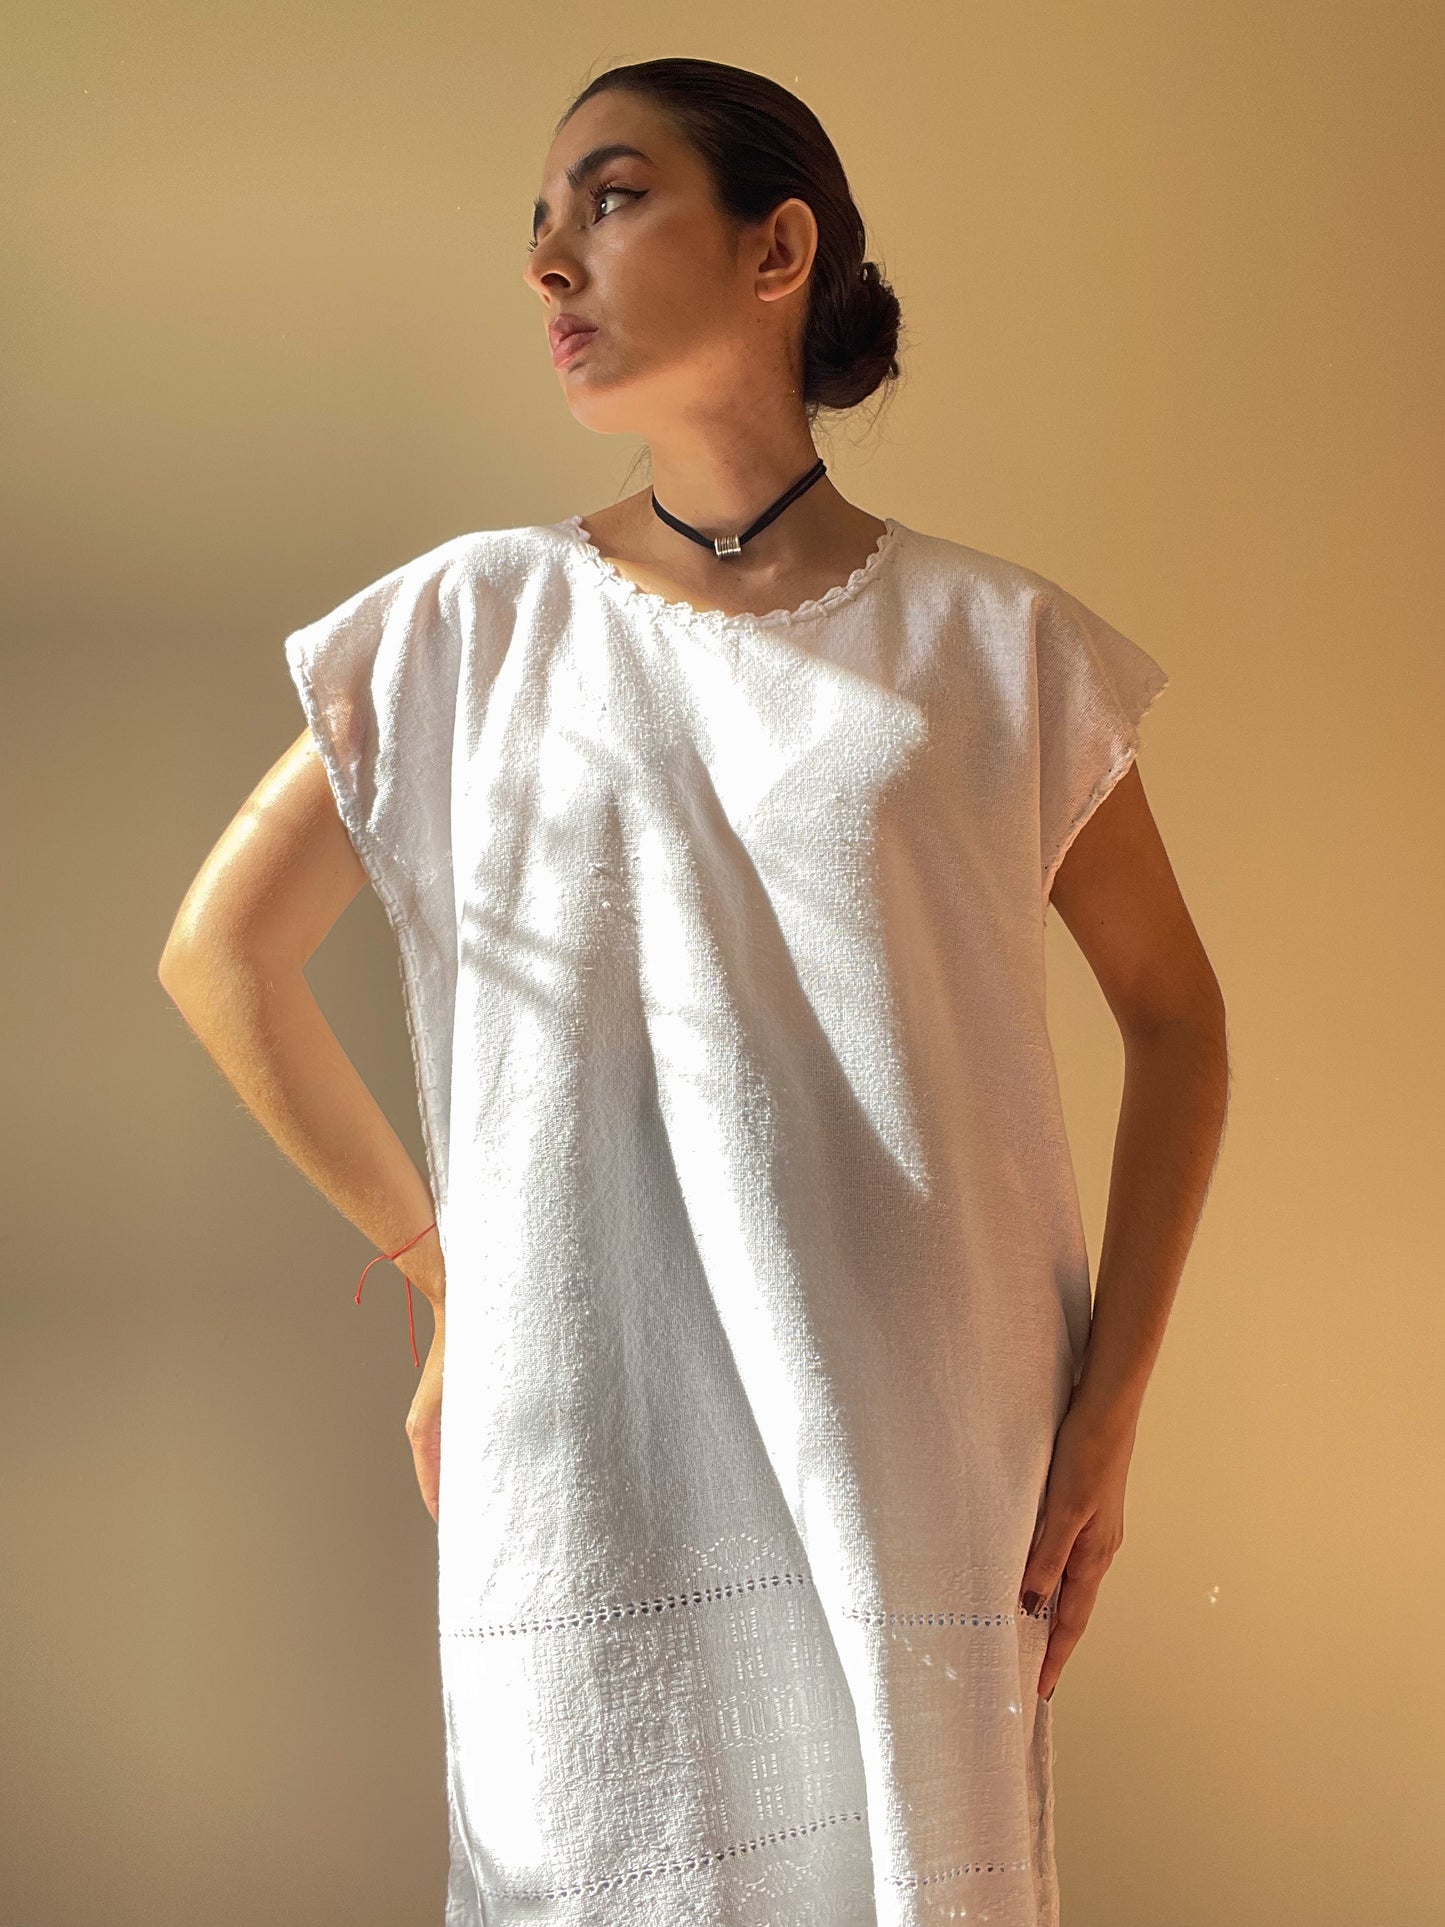 Handmade Mexican Embroidered White Cotton Dress